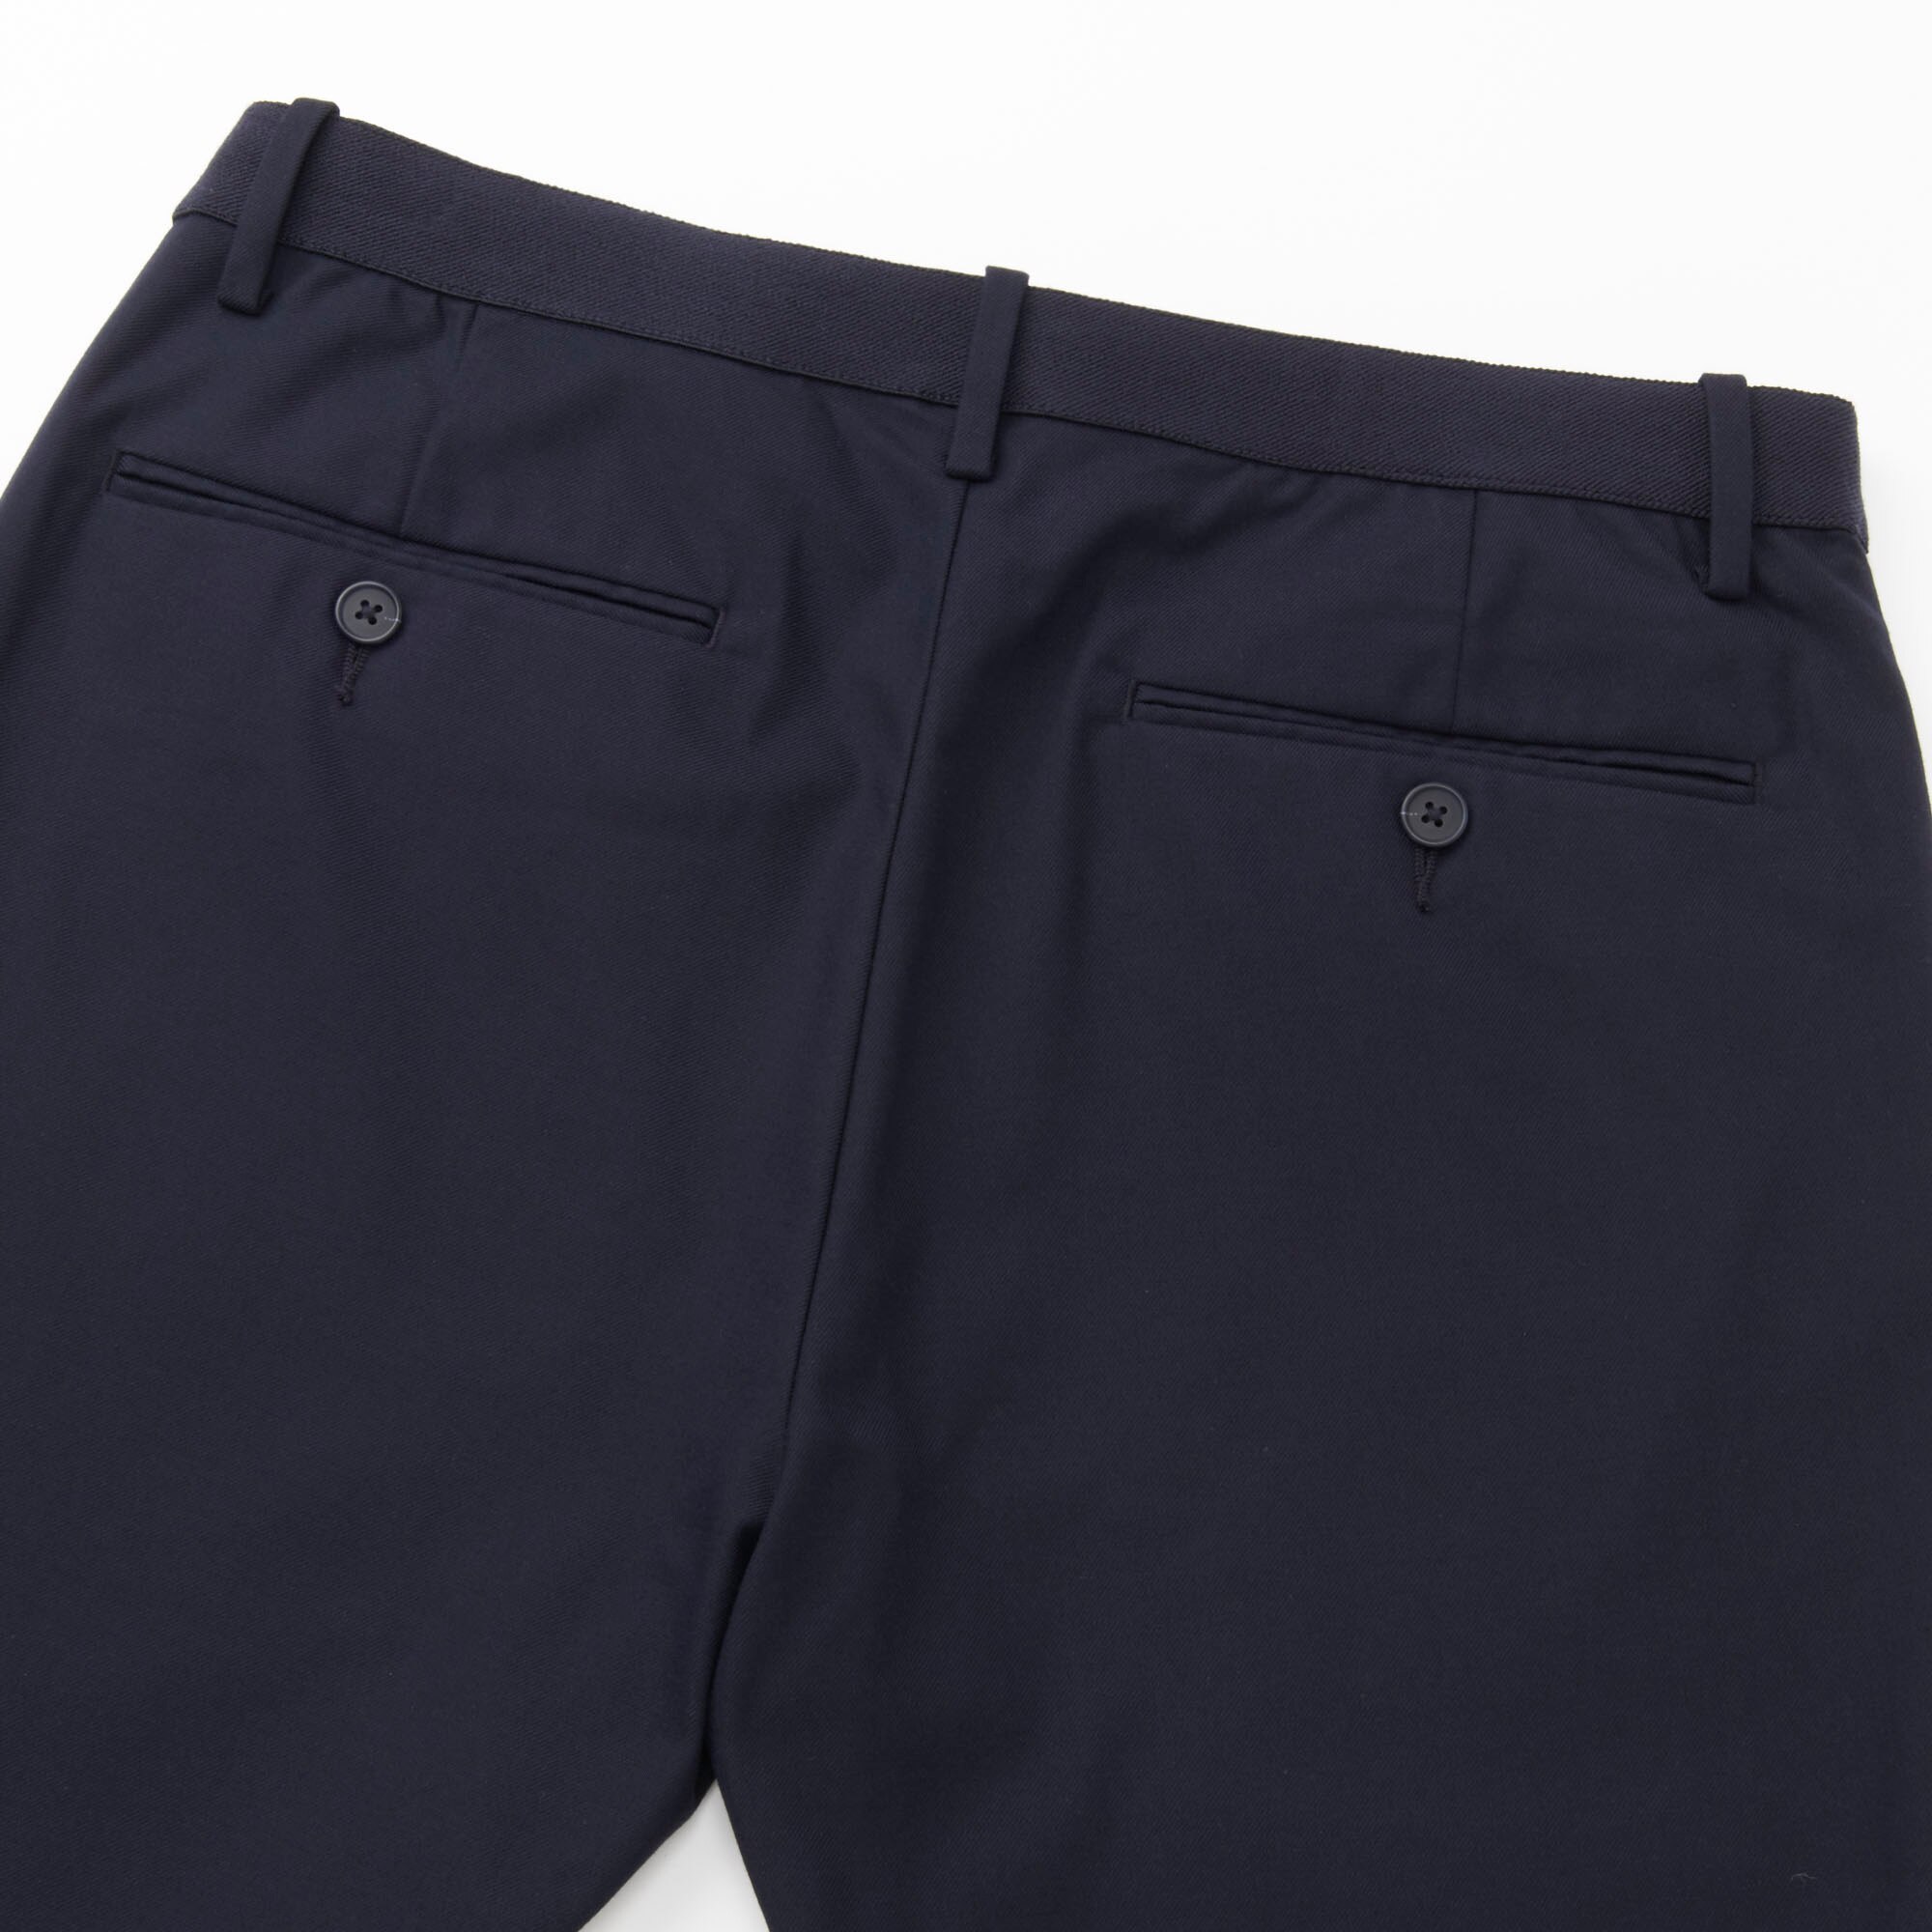 MEN RELAXED ANKLE PANTS (COTTON) | UNIQLO US